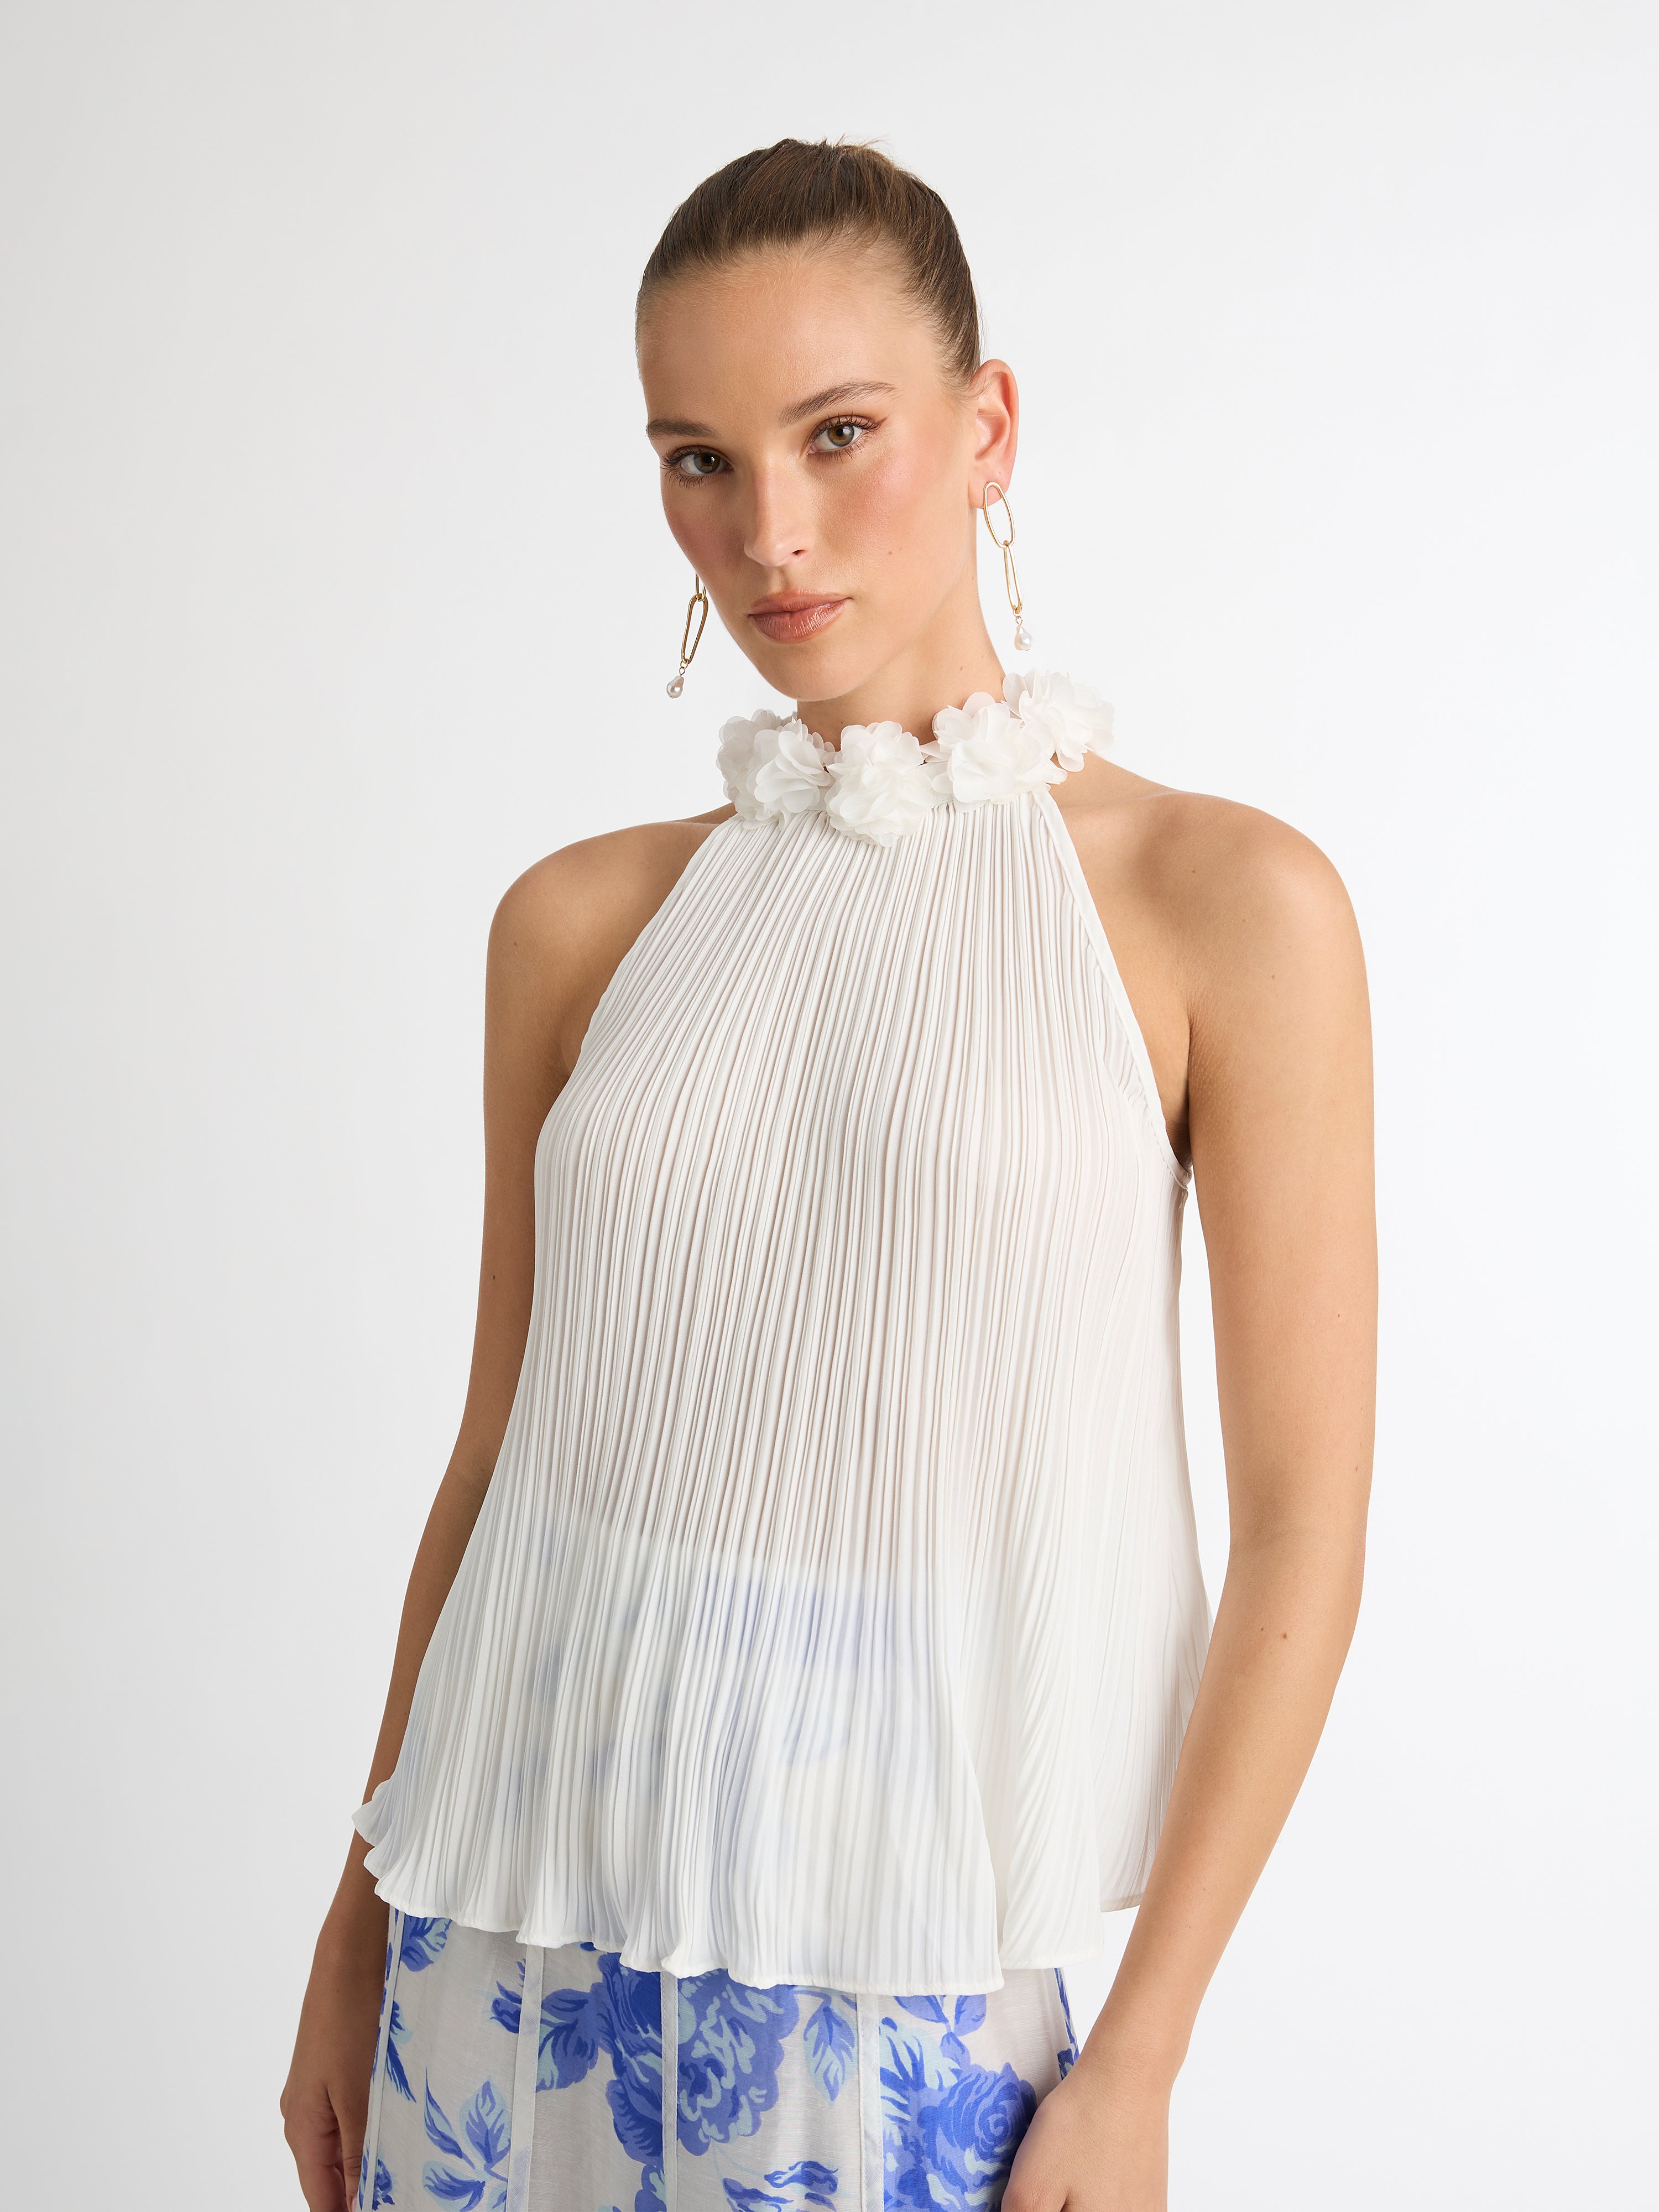 Blossoms Top White, Pleated Halter Neck Top